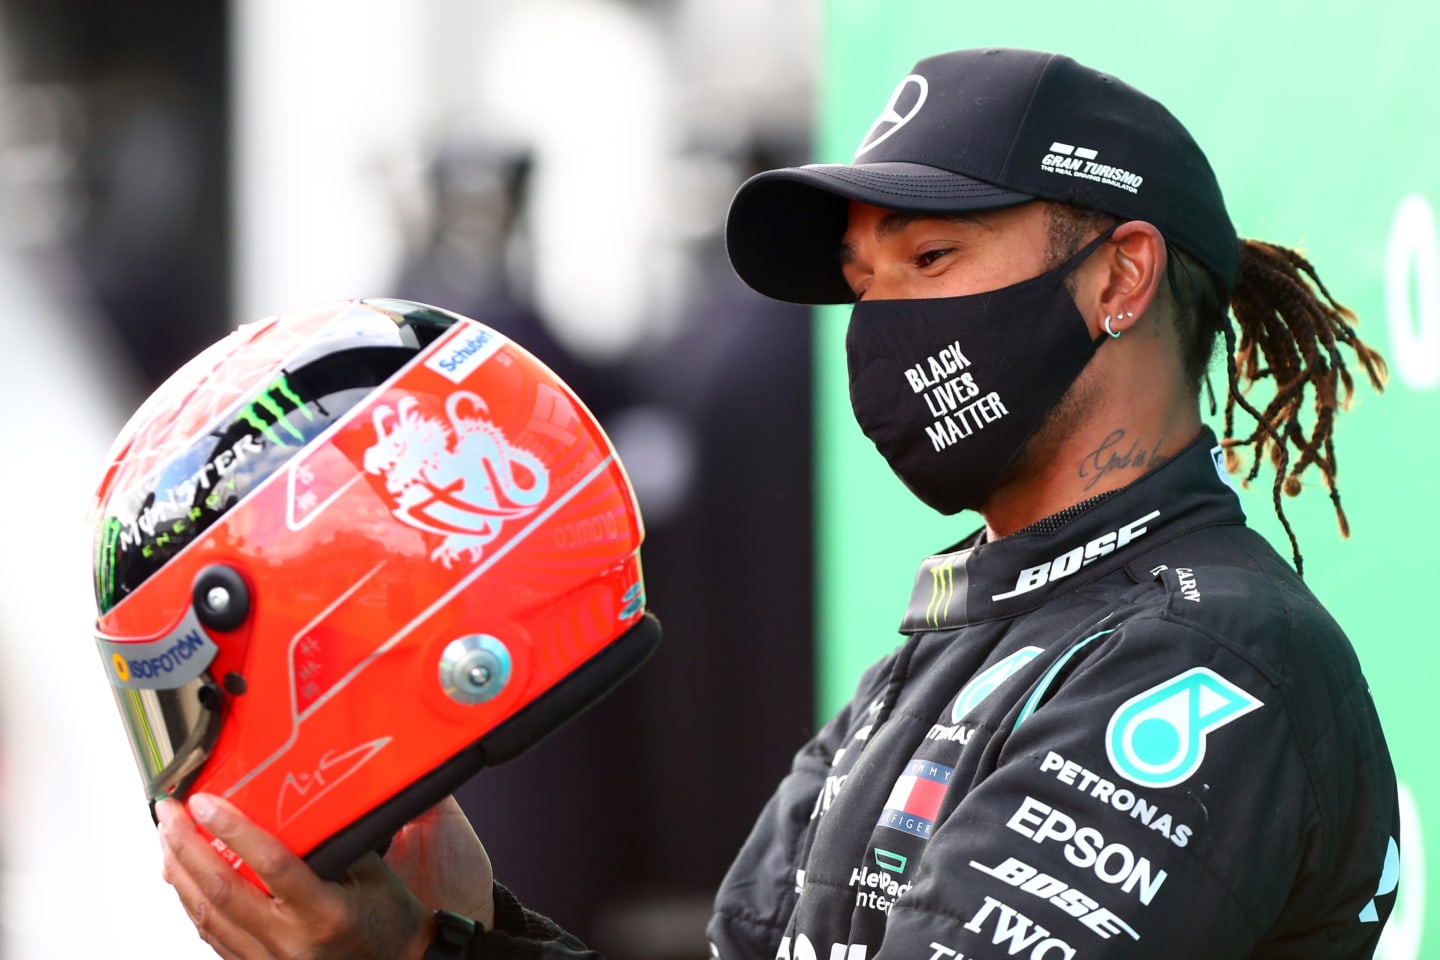 NUERBURG, GERMANY - OCTOBER 11: Race winner Lewis Hamilton of Great Britain and Mercedes GP celebrates after being presented with a helmet of Michael Schumacher for matching his record of 91 race wins during the F1 Eifel Grand Prix at Nuerburgring on October 11, 2020 in Nuerburg, Germany. (Photo by Dan Istitene - Formula 1/Formula 1 via Getty Images)